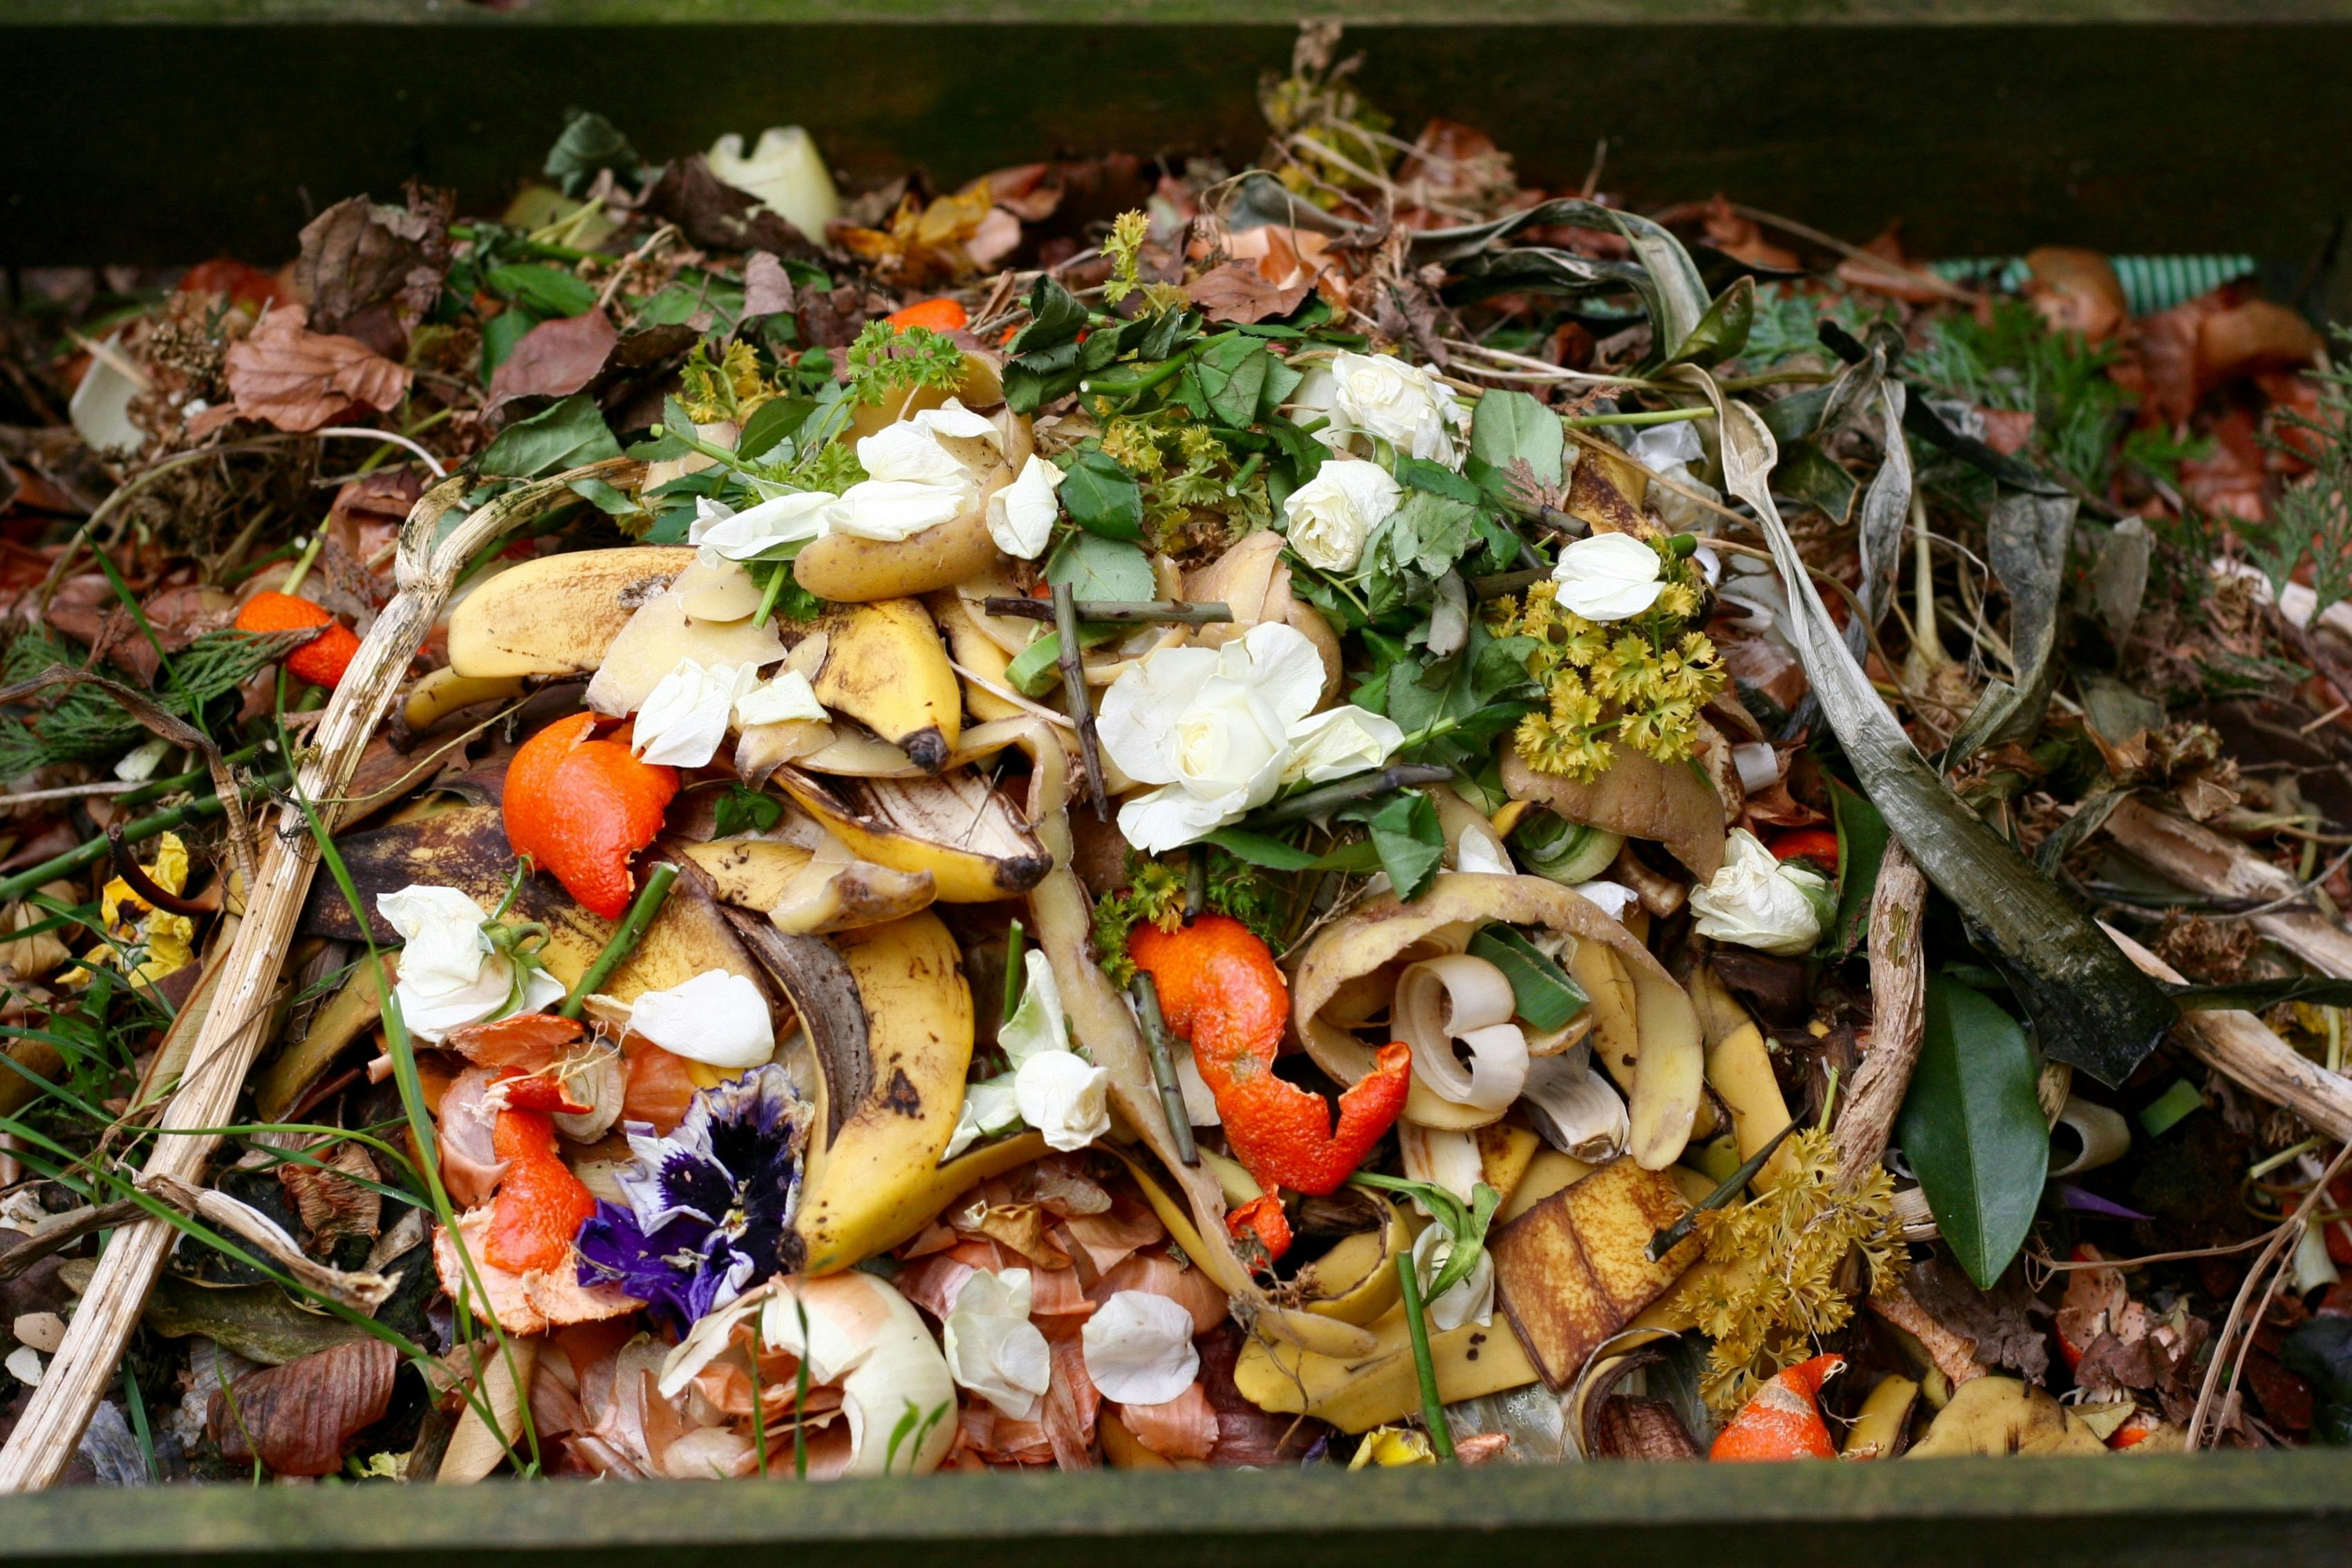 Pile of fruit and vegetable waste showcasing Australia's food waste crisis and the need for behaviour change.